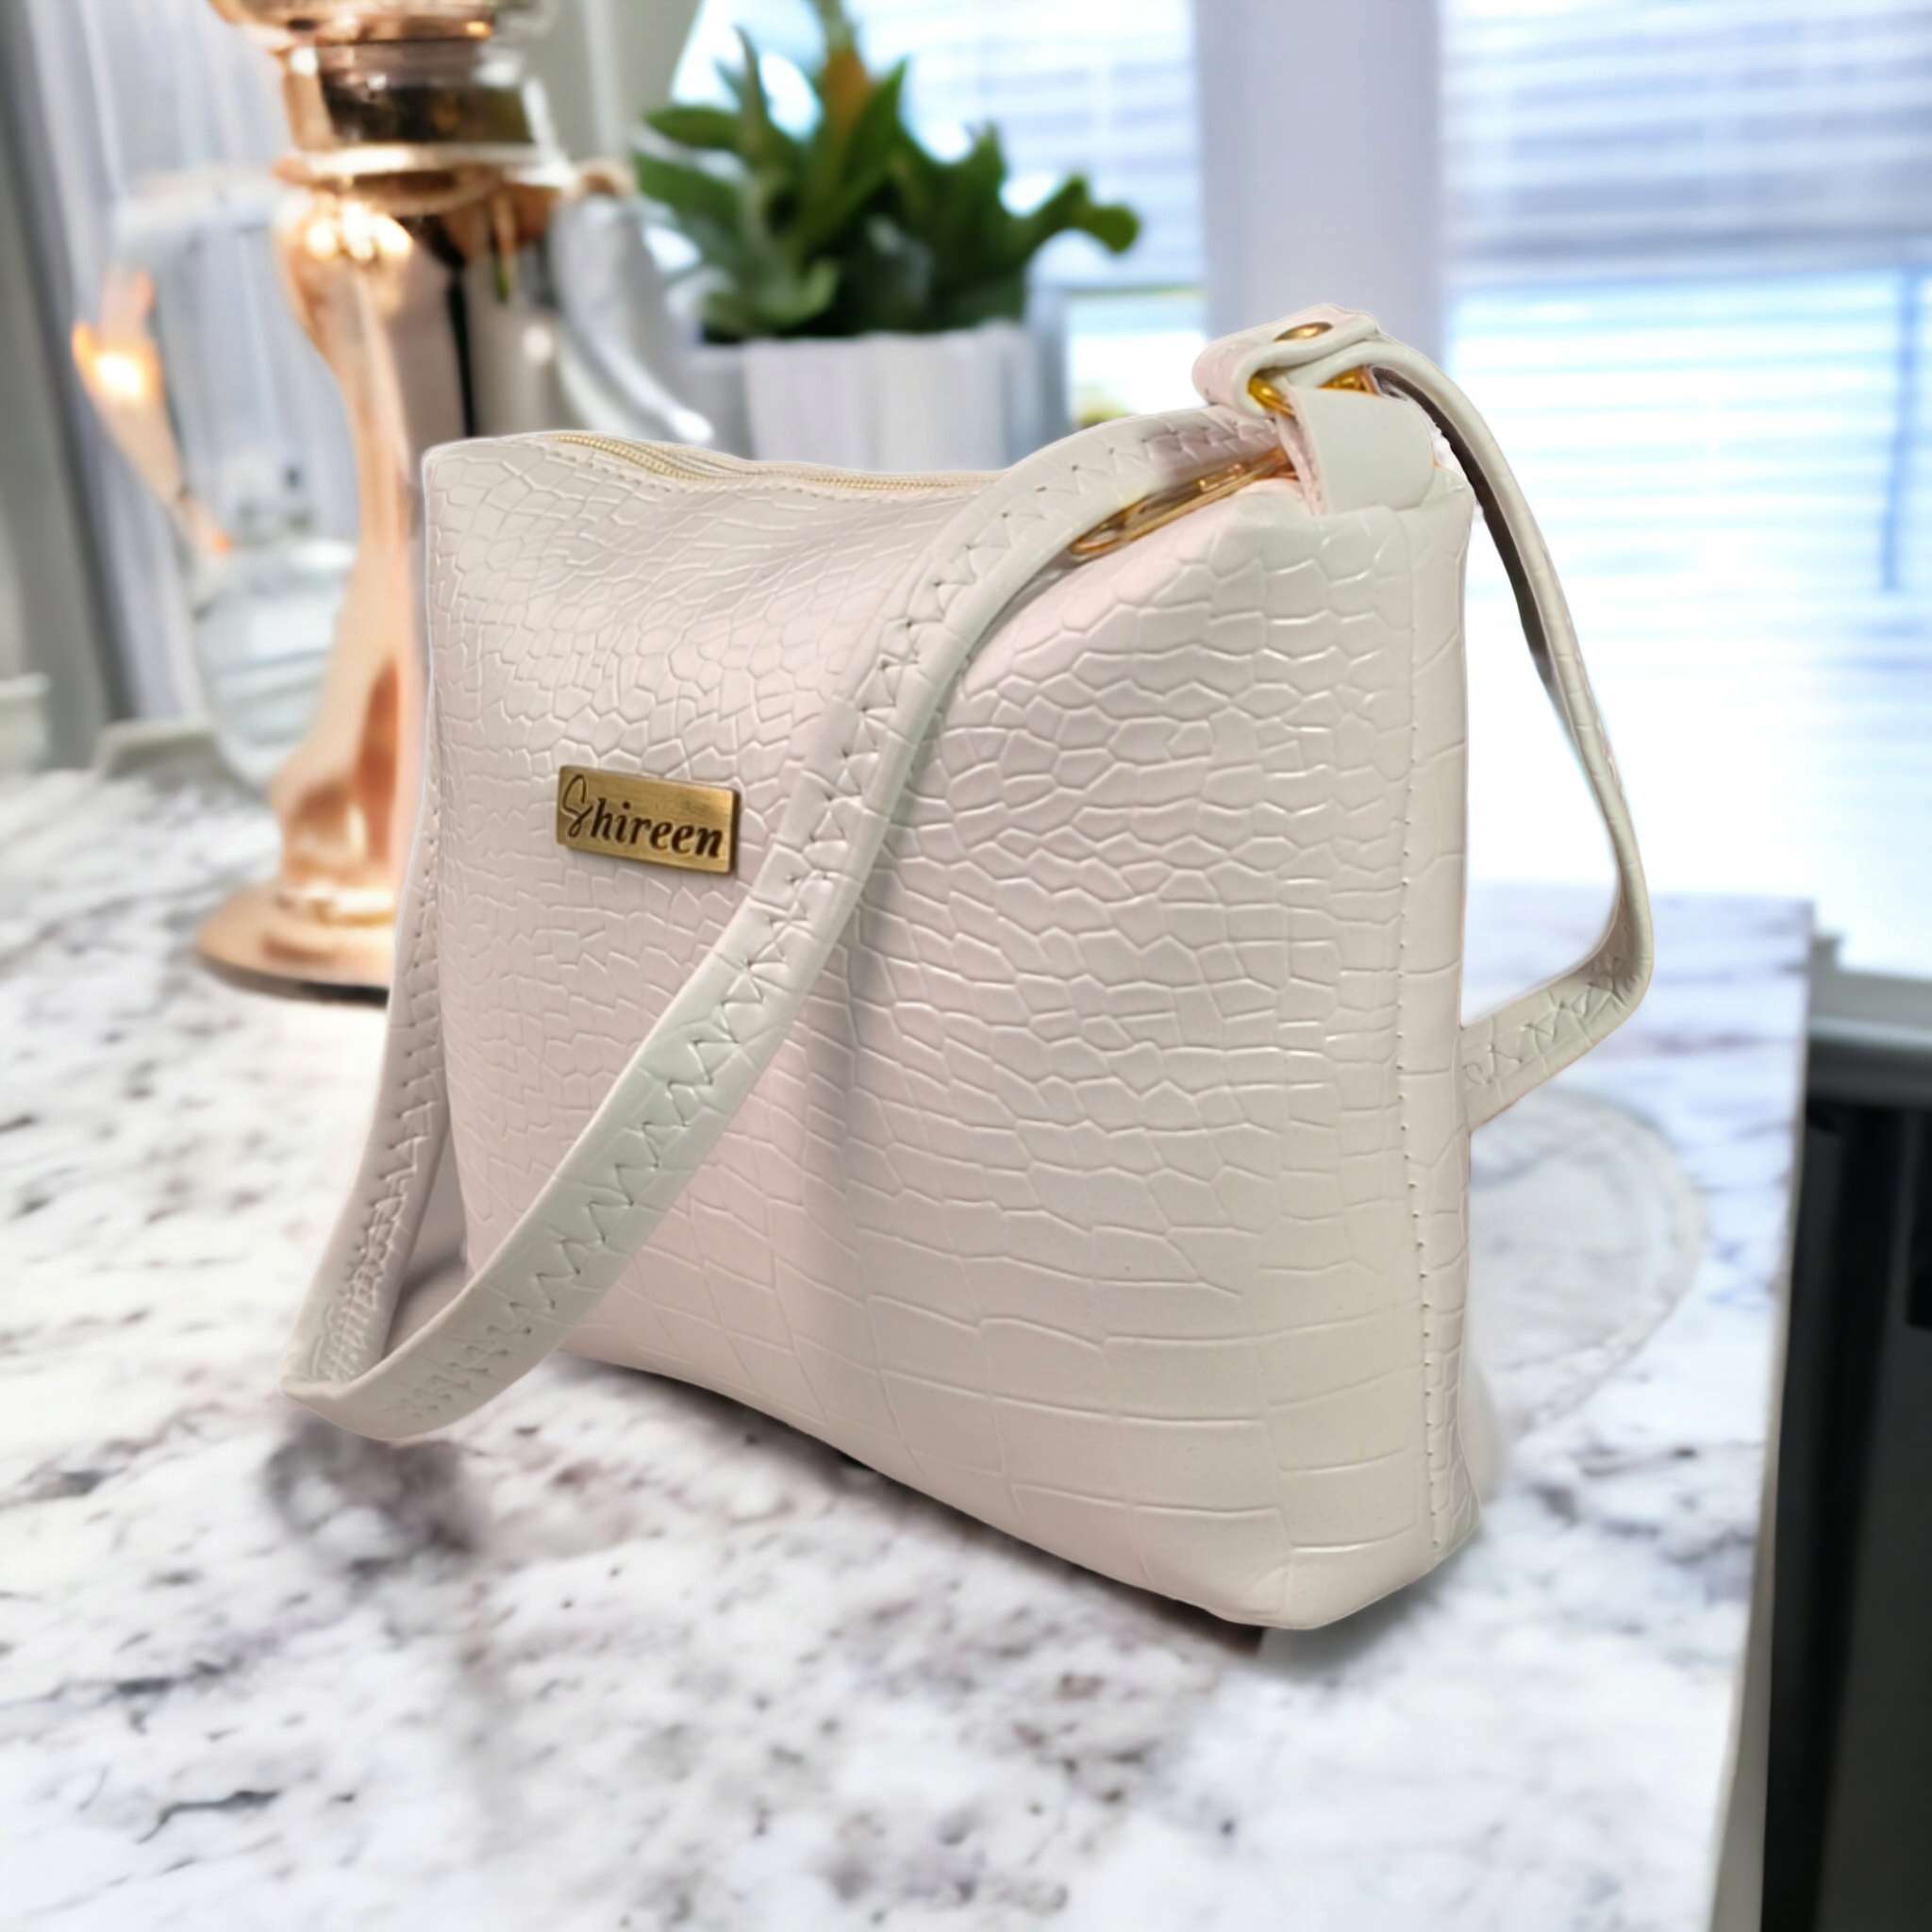 Kate Spade Purses ON SALE for under $150! | Southern Belle in Training